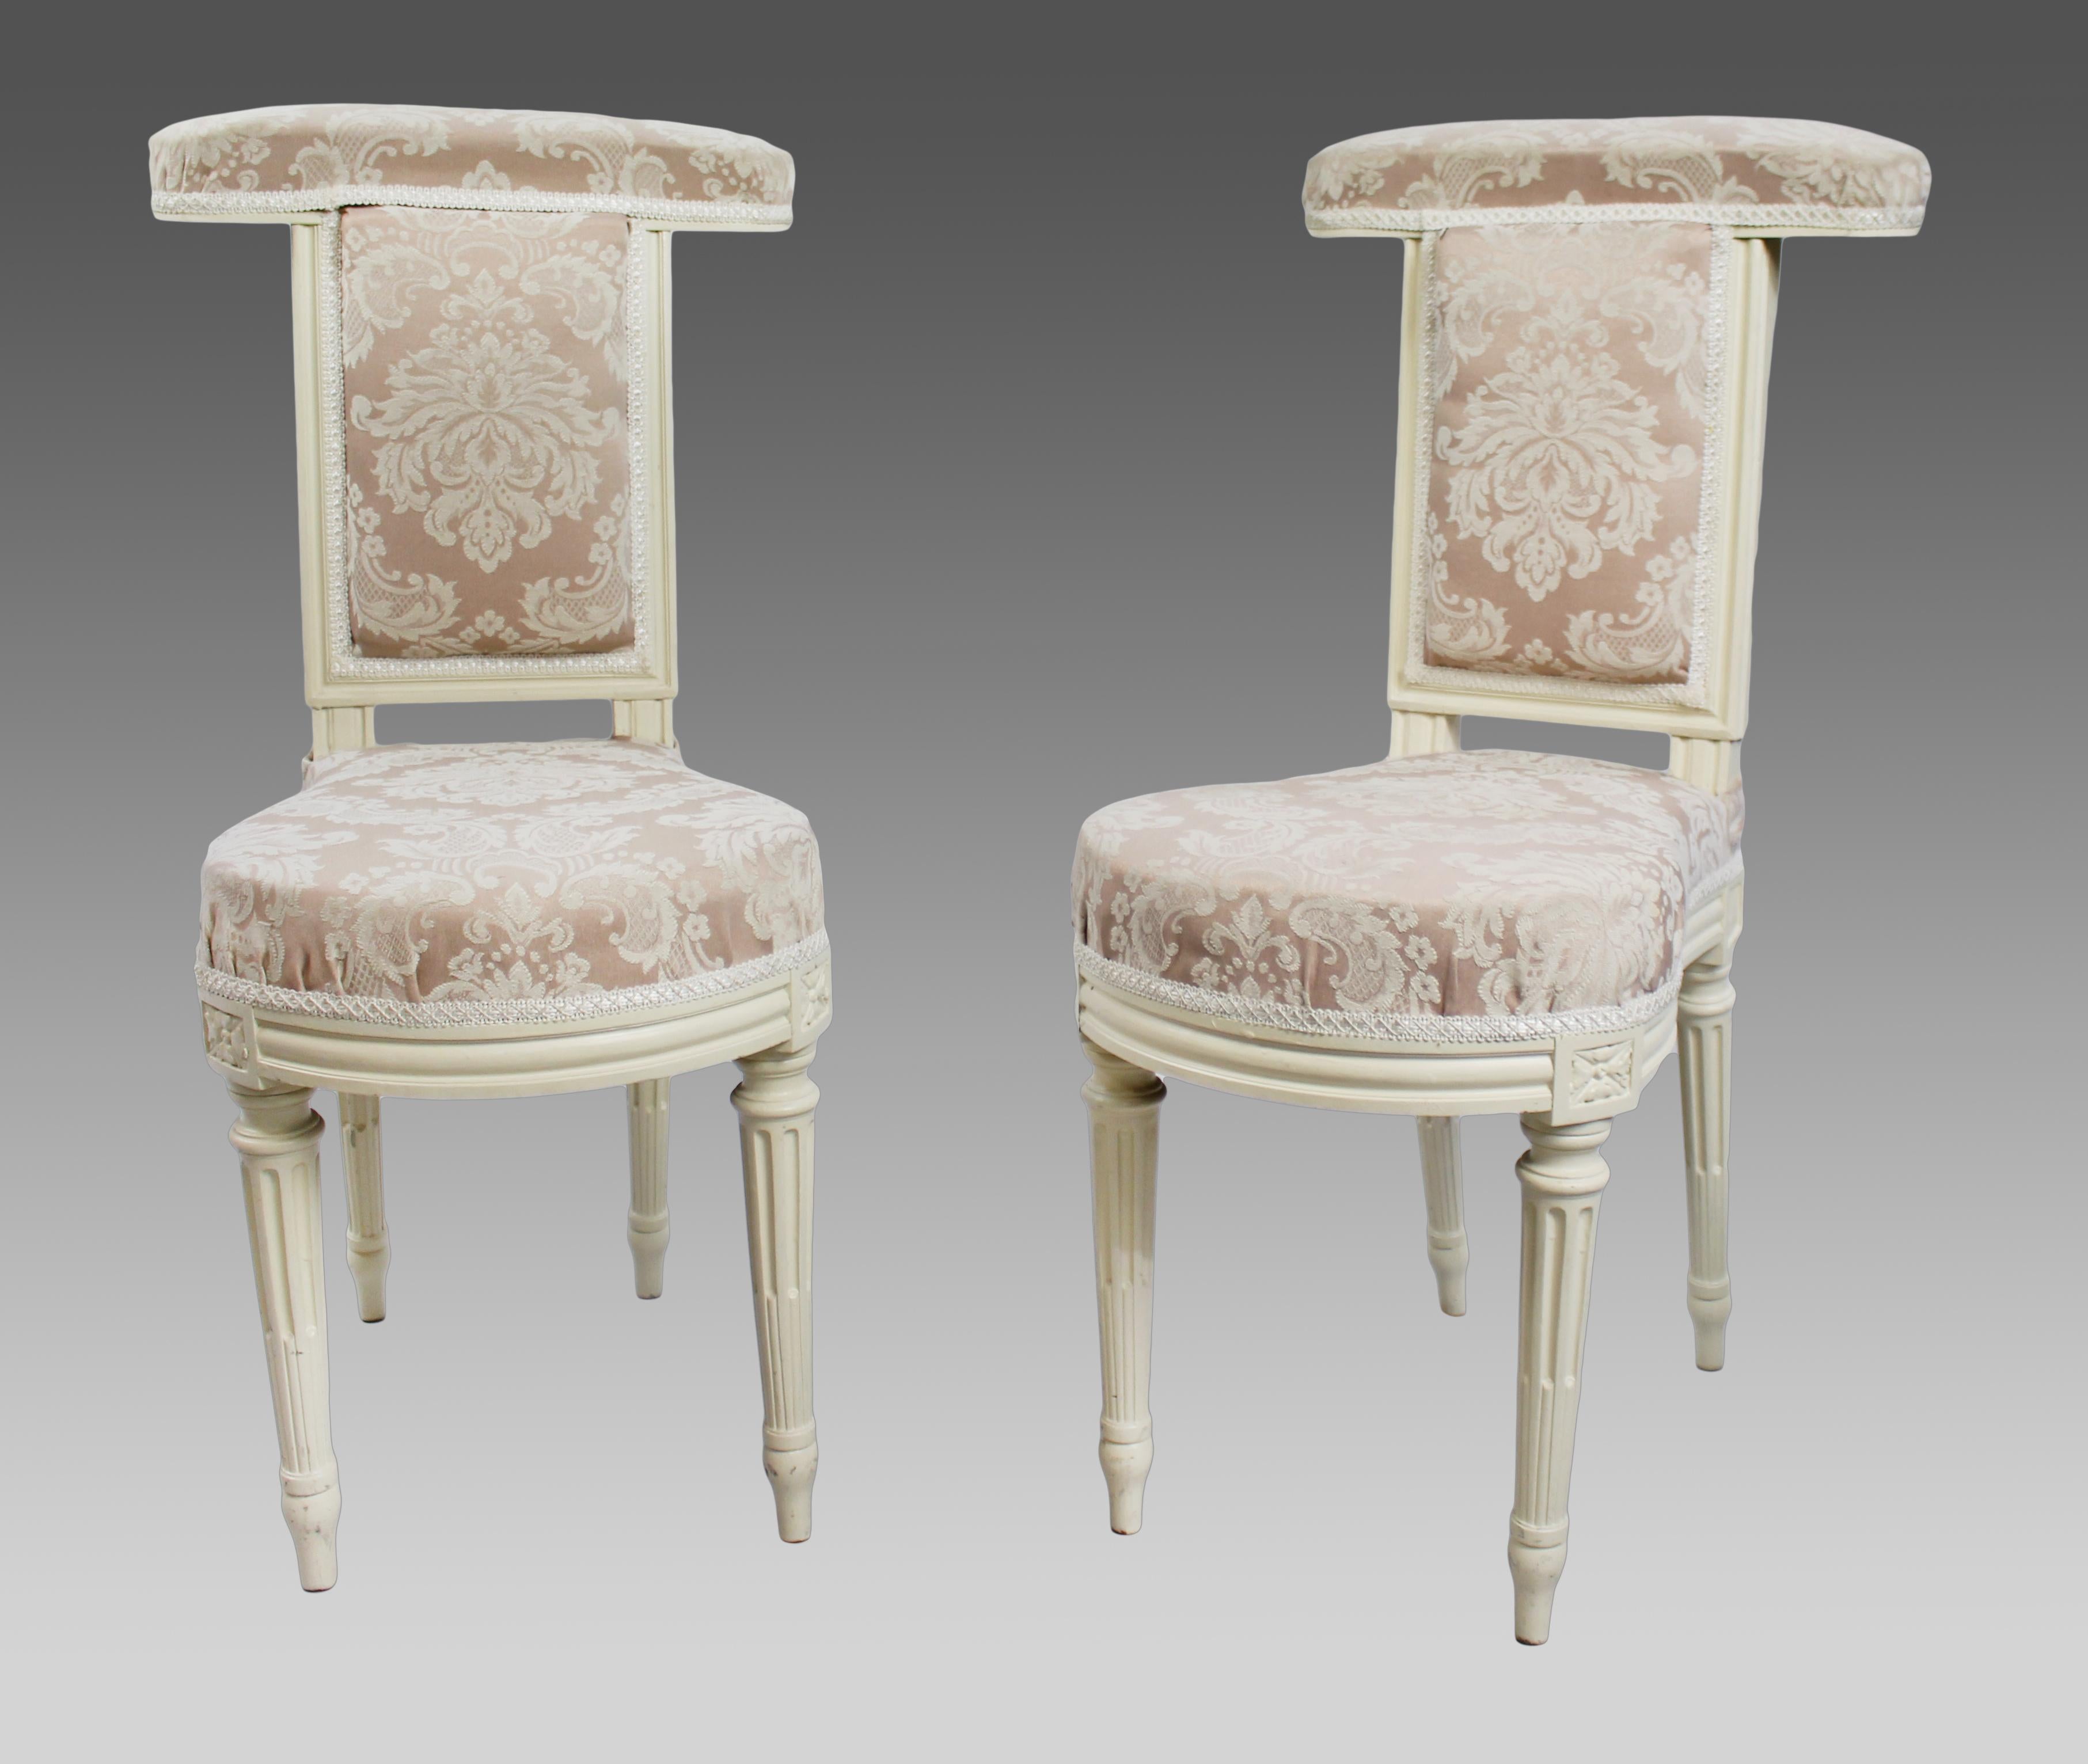 Pair of early antique French painted Voyeuse chairs


Measures: Width 44 cm 17 1/4 in
Depth 56 cm 22 in
Height 88 cm 34 1/2 in


Period Early 19th century, French

Composition Carved wood, later white painted finish

Condition Structure